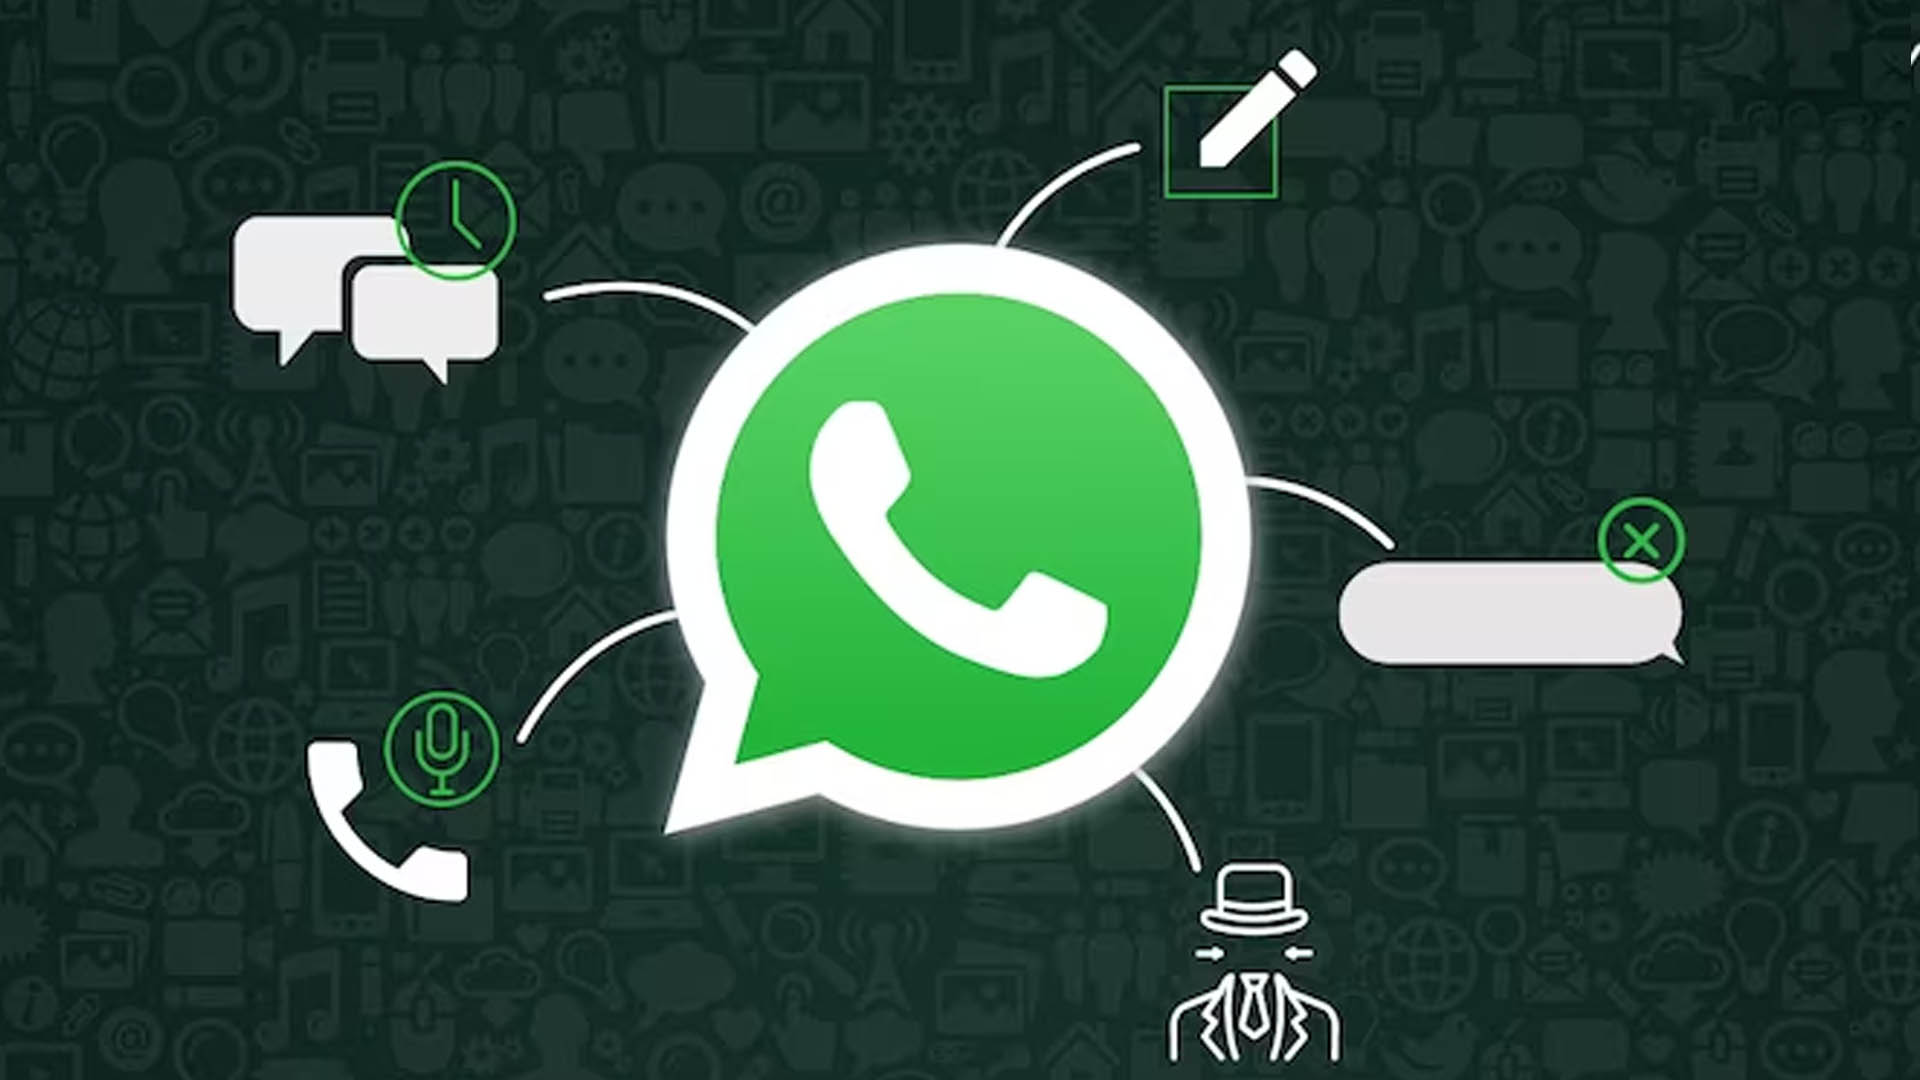 WhatsApp to roll out new privacy feature - Alternate Profile soon